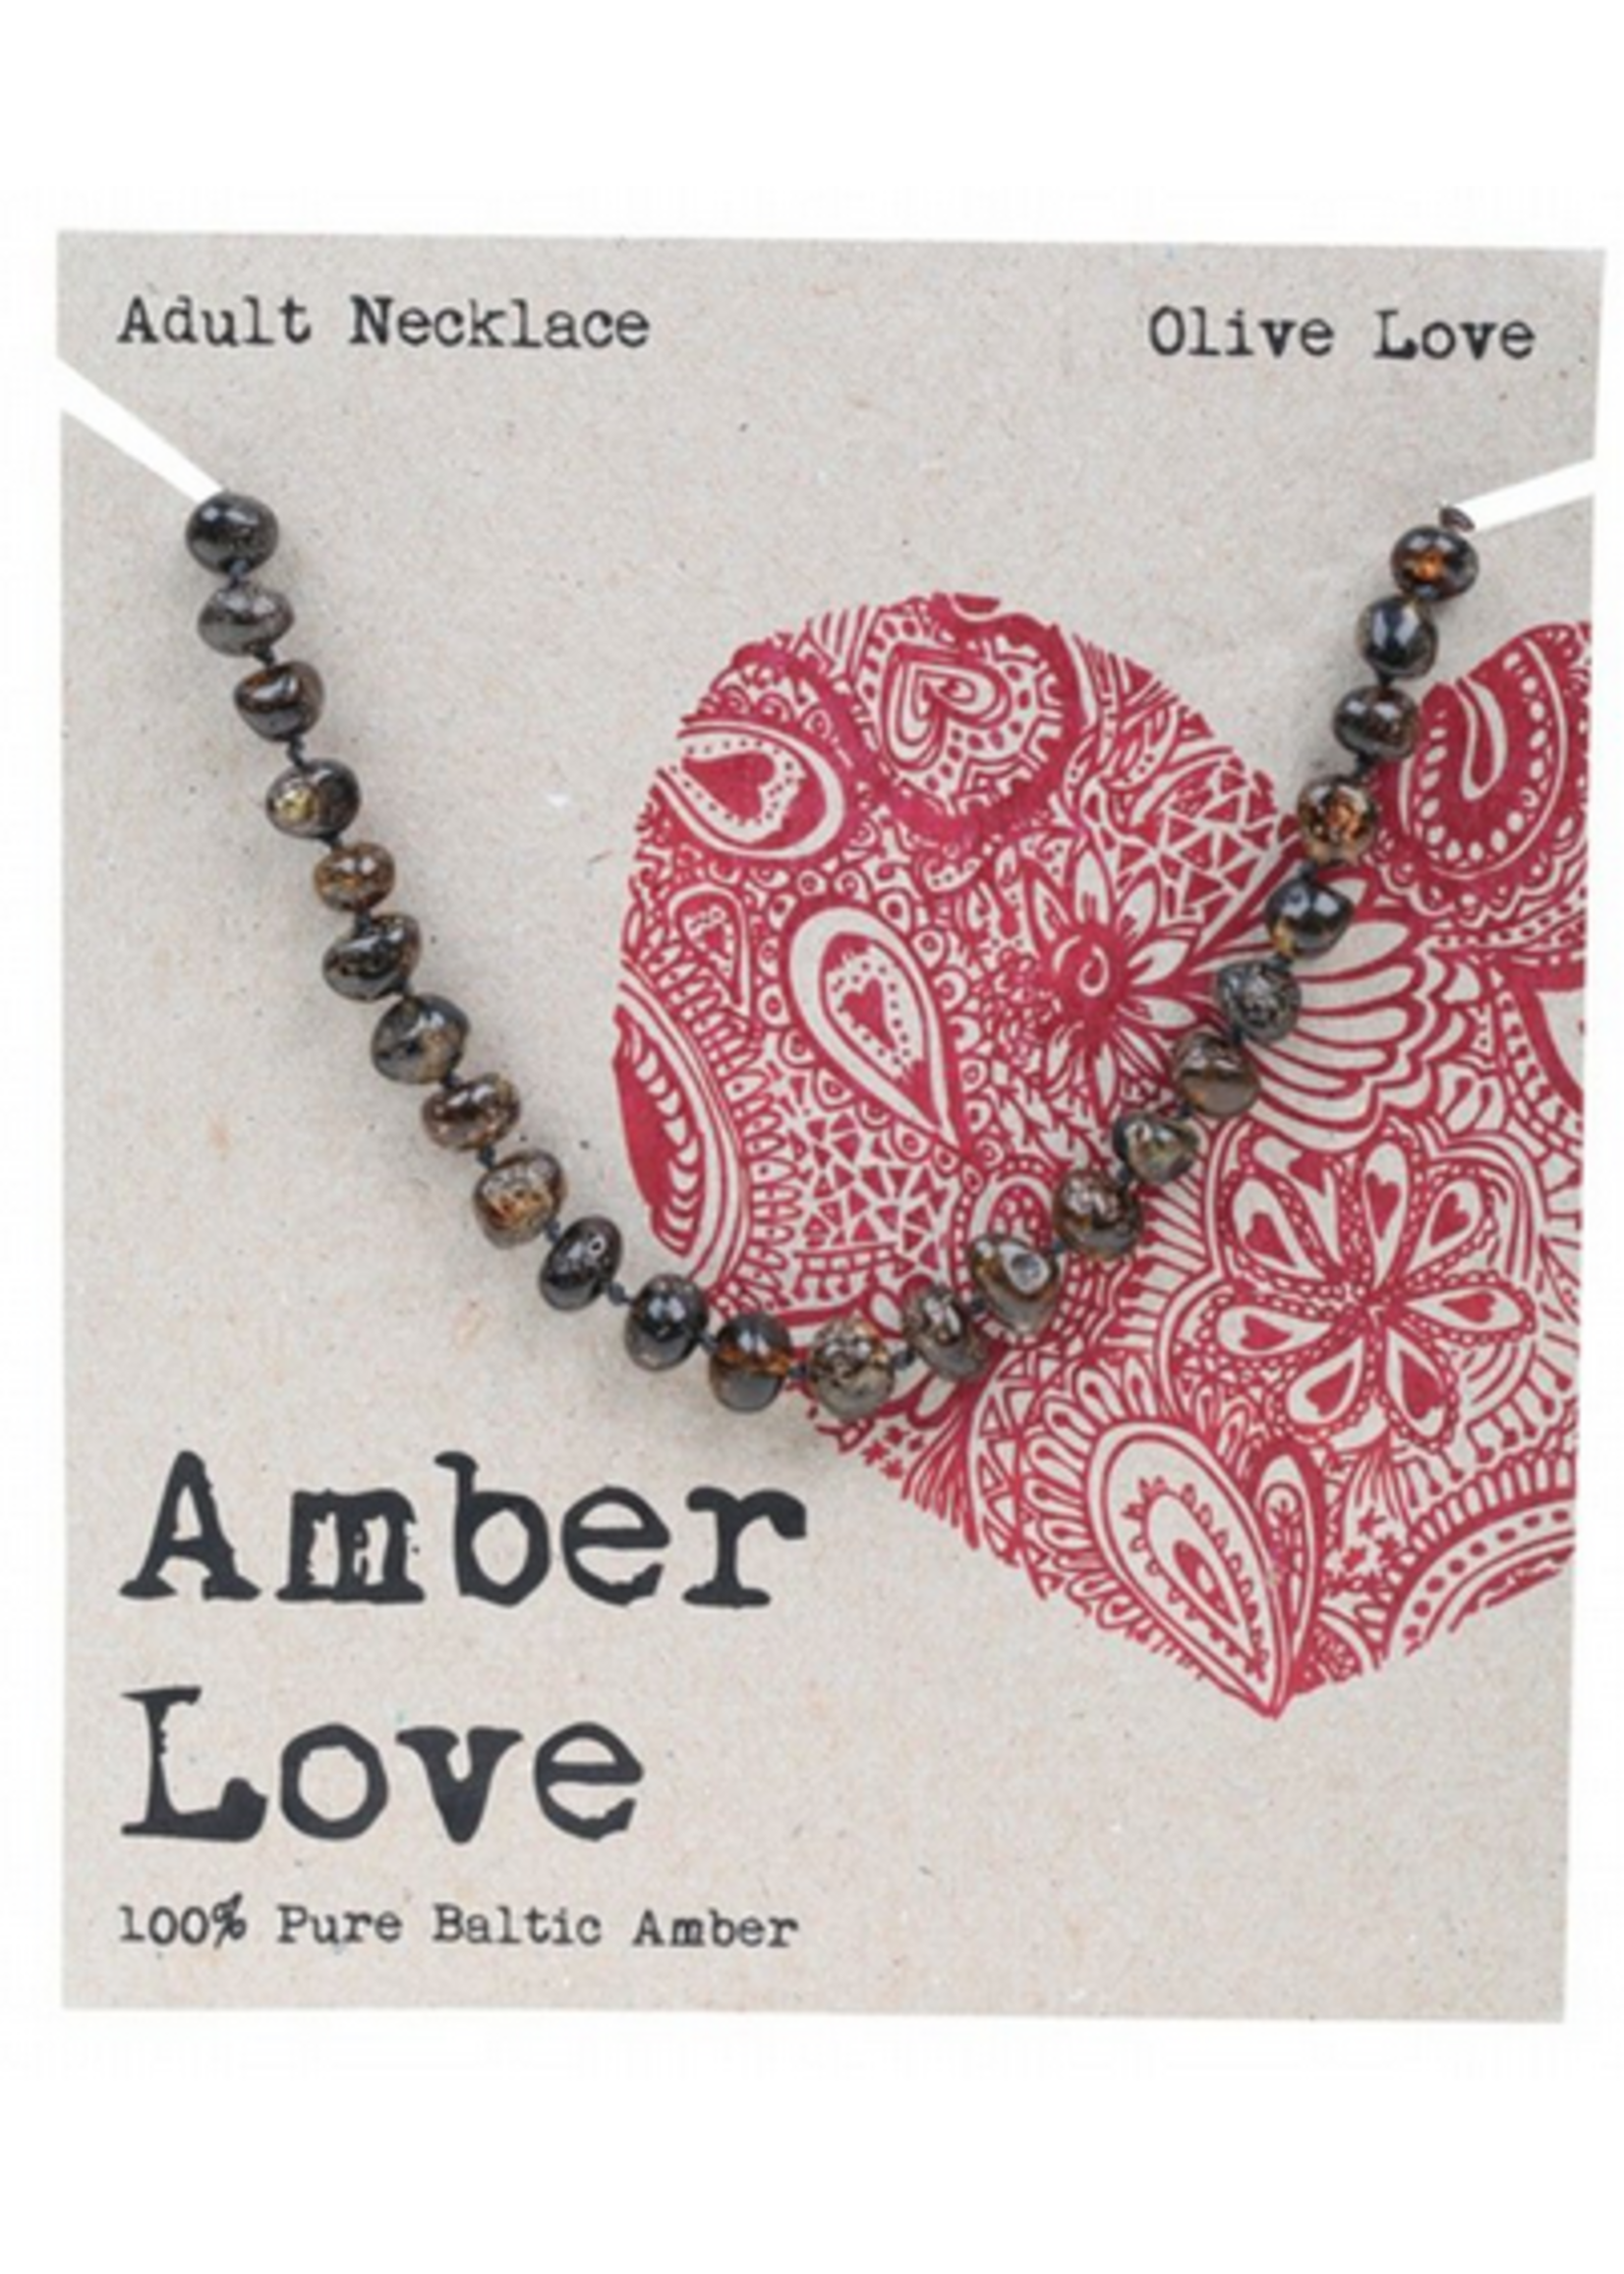 Amber Love Amber Love Amber Olive Love Adult Necklace